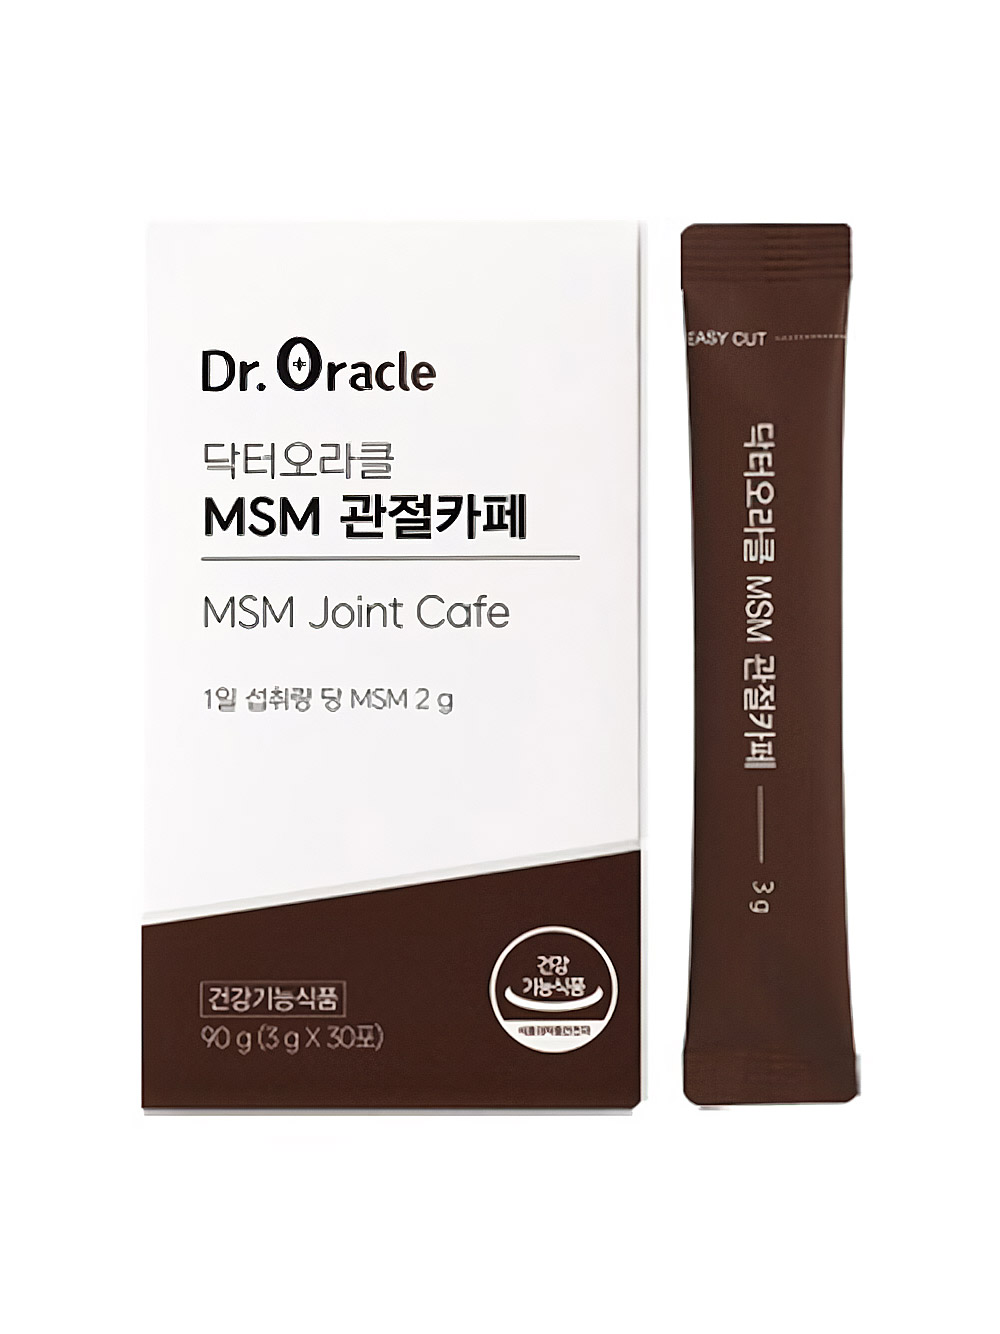 Dr. Oracle MSM Joint Cafe 3g x 30p